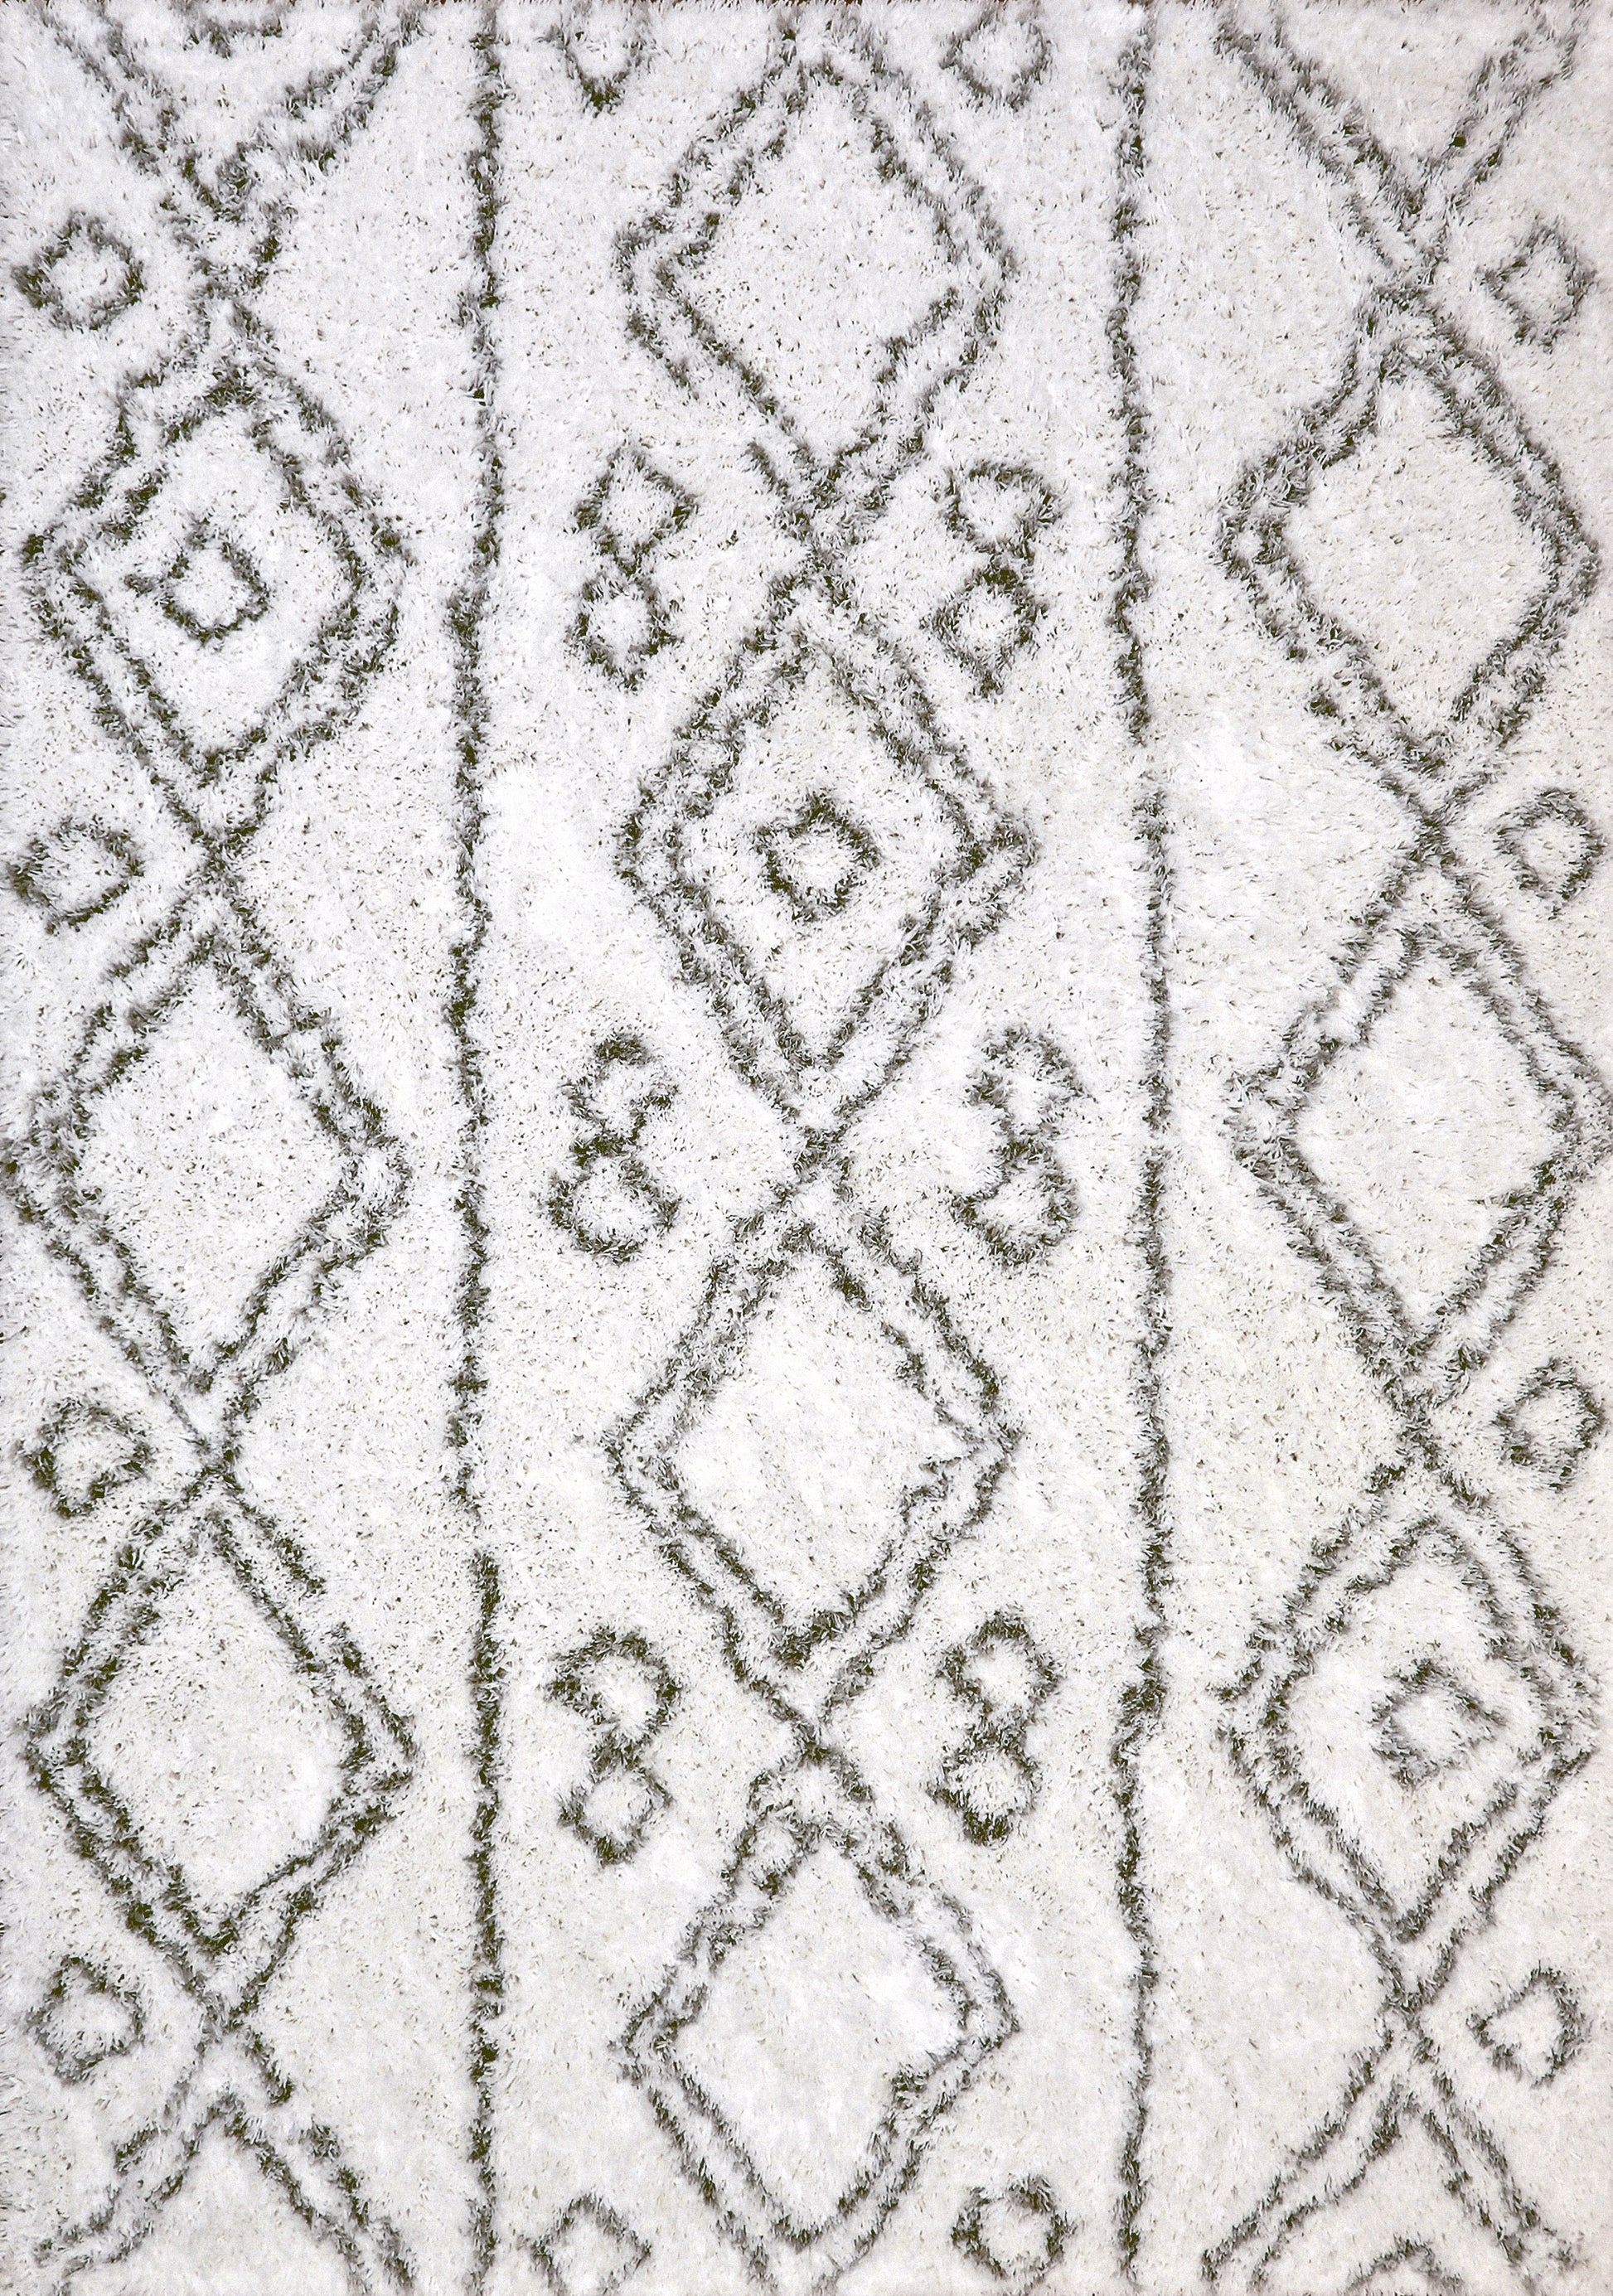 Dynamic Rugs Nordic 7434 Silver/White Area Rug